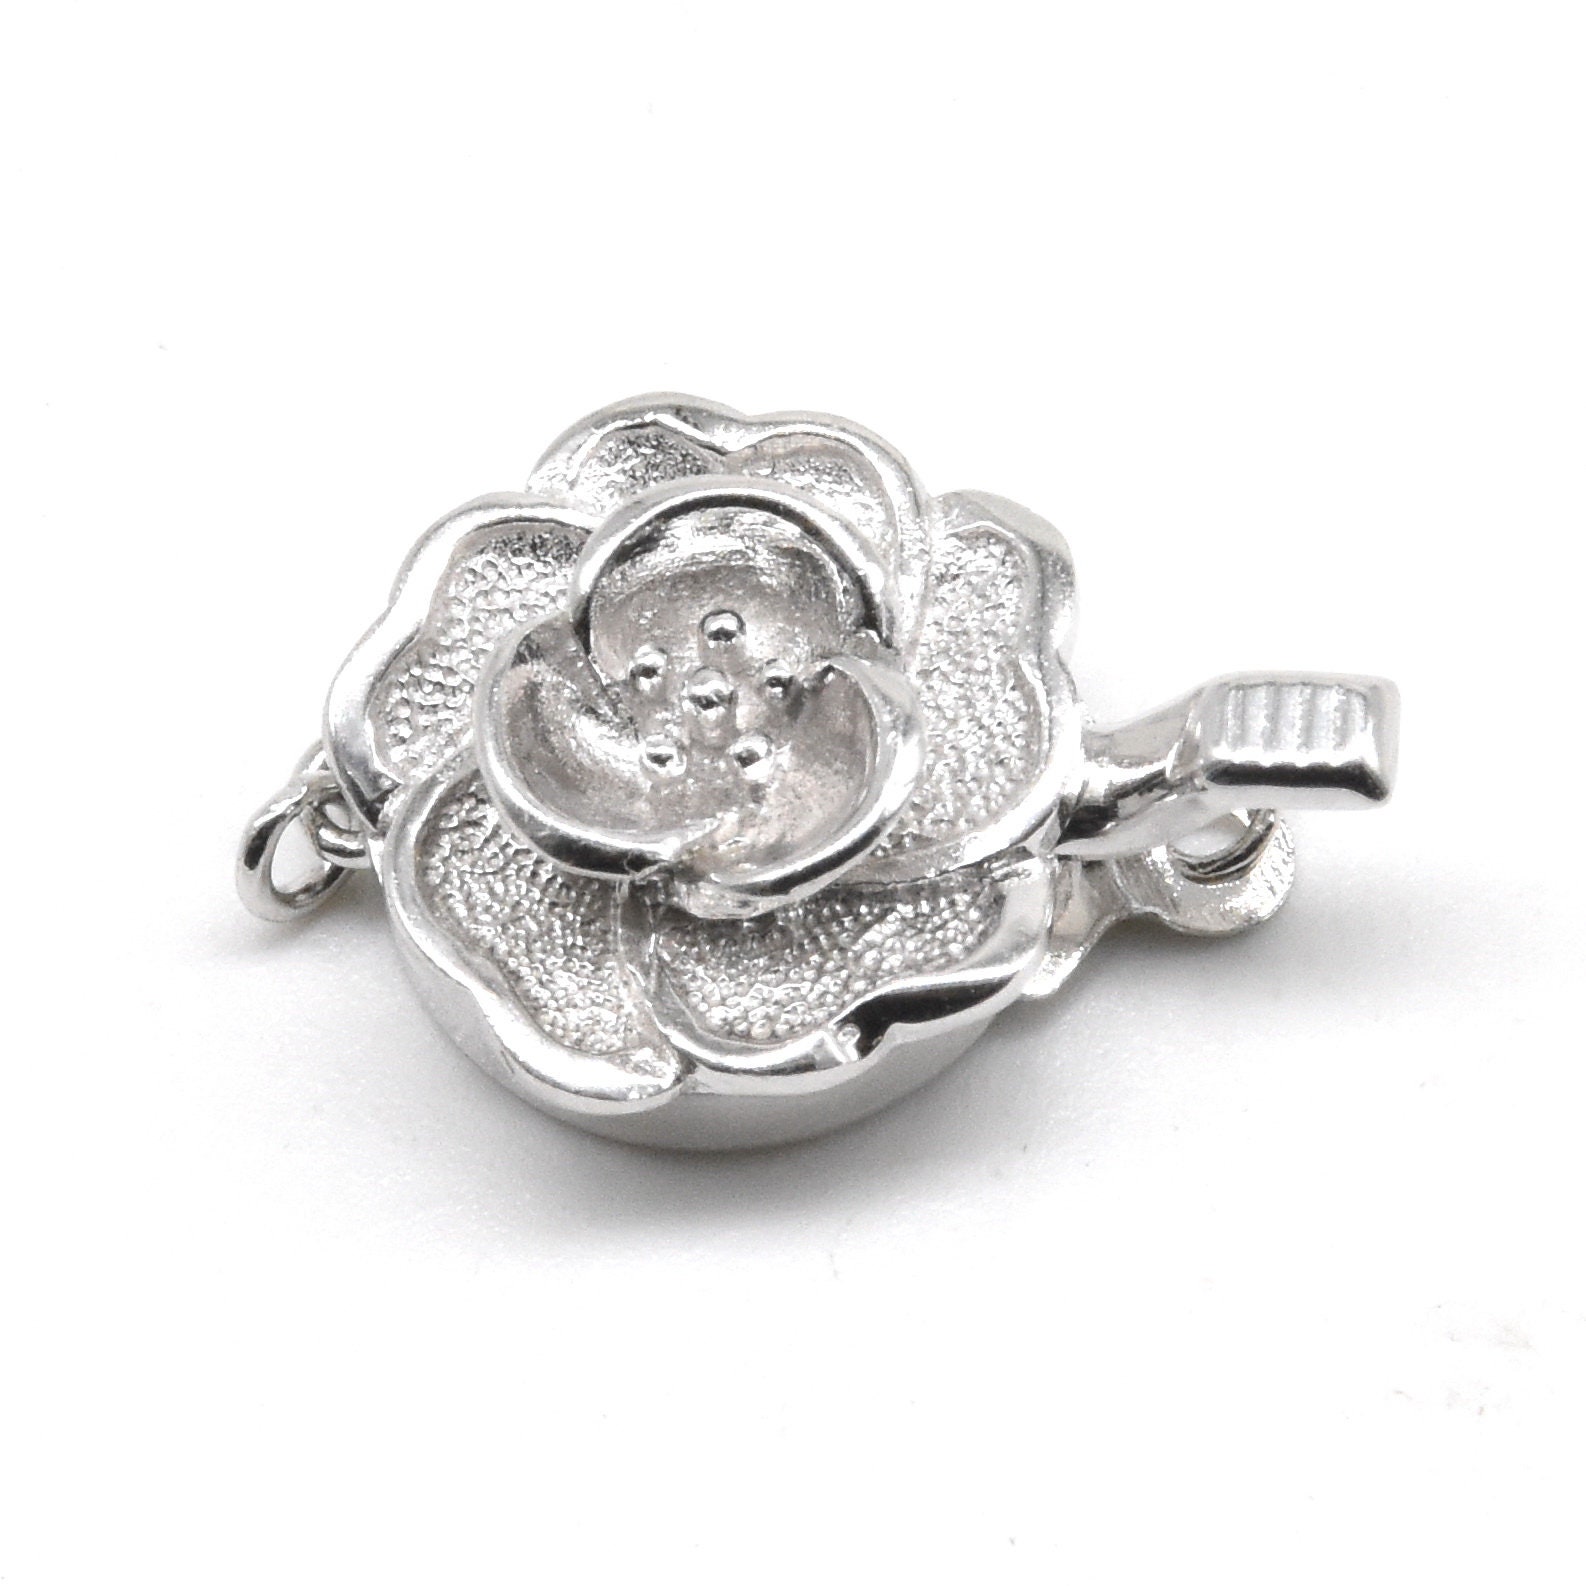  .925 Sterling Silver 10mm Round Filigree Flower Pearl Necklace  Enhancer Shortener Connector Clasp with Safety Lock : Everything Else